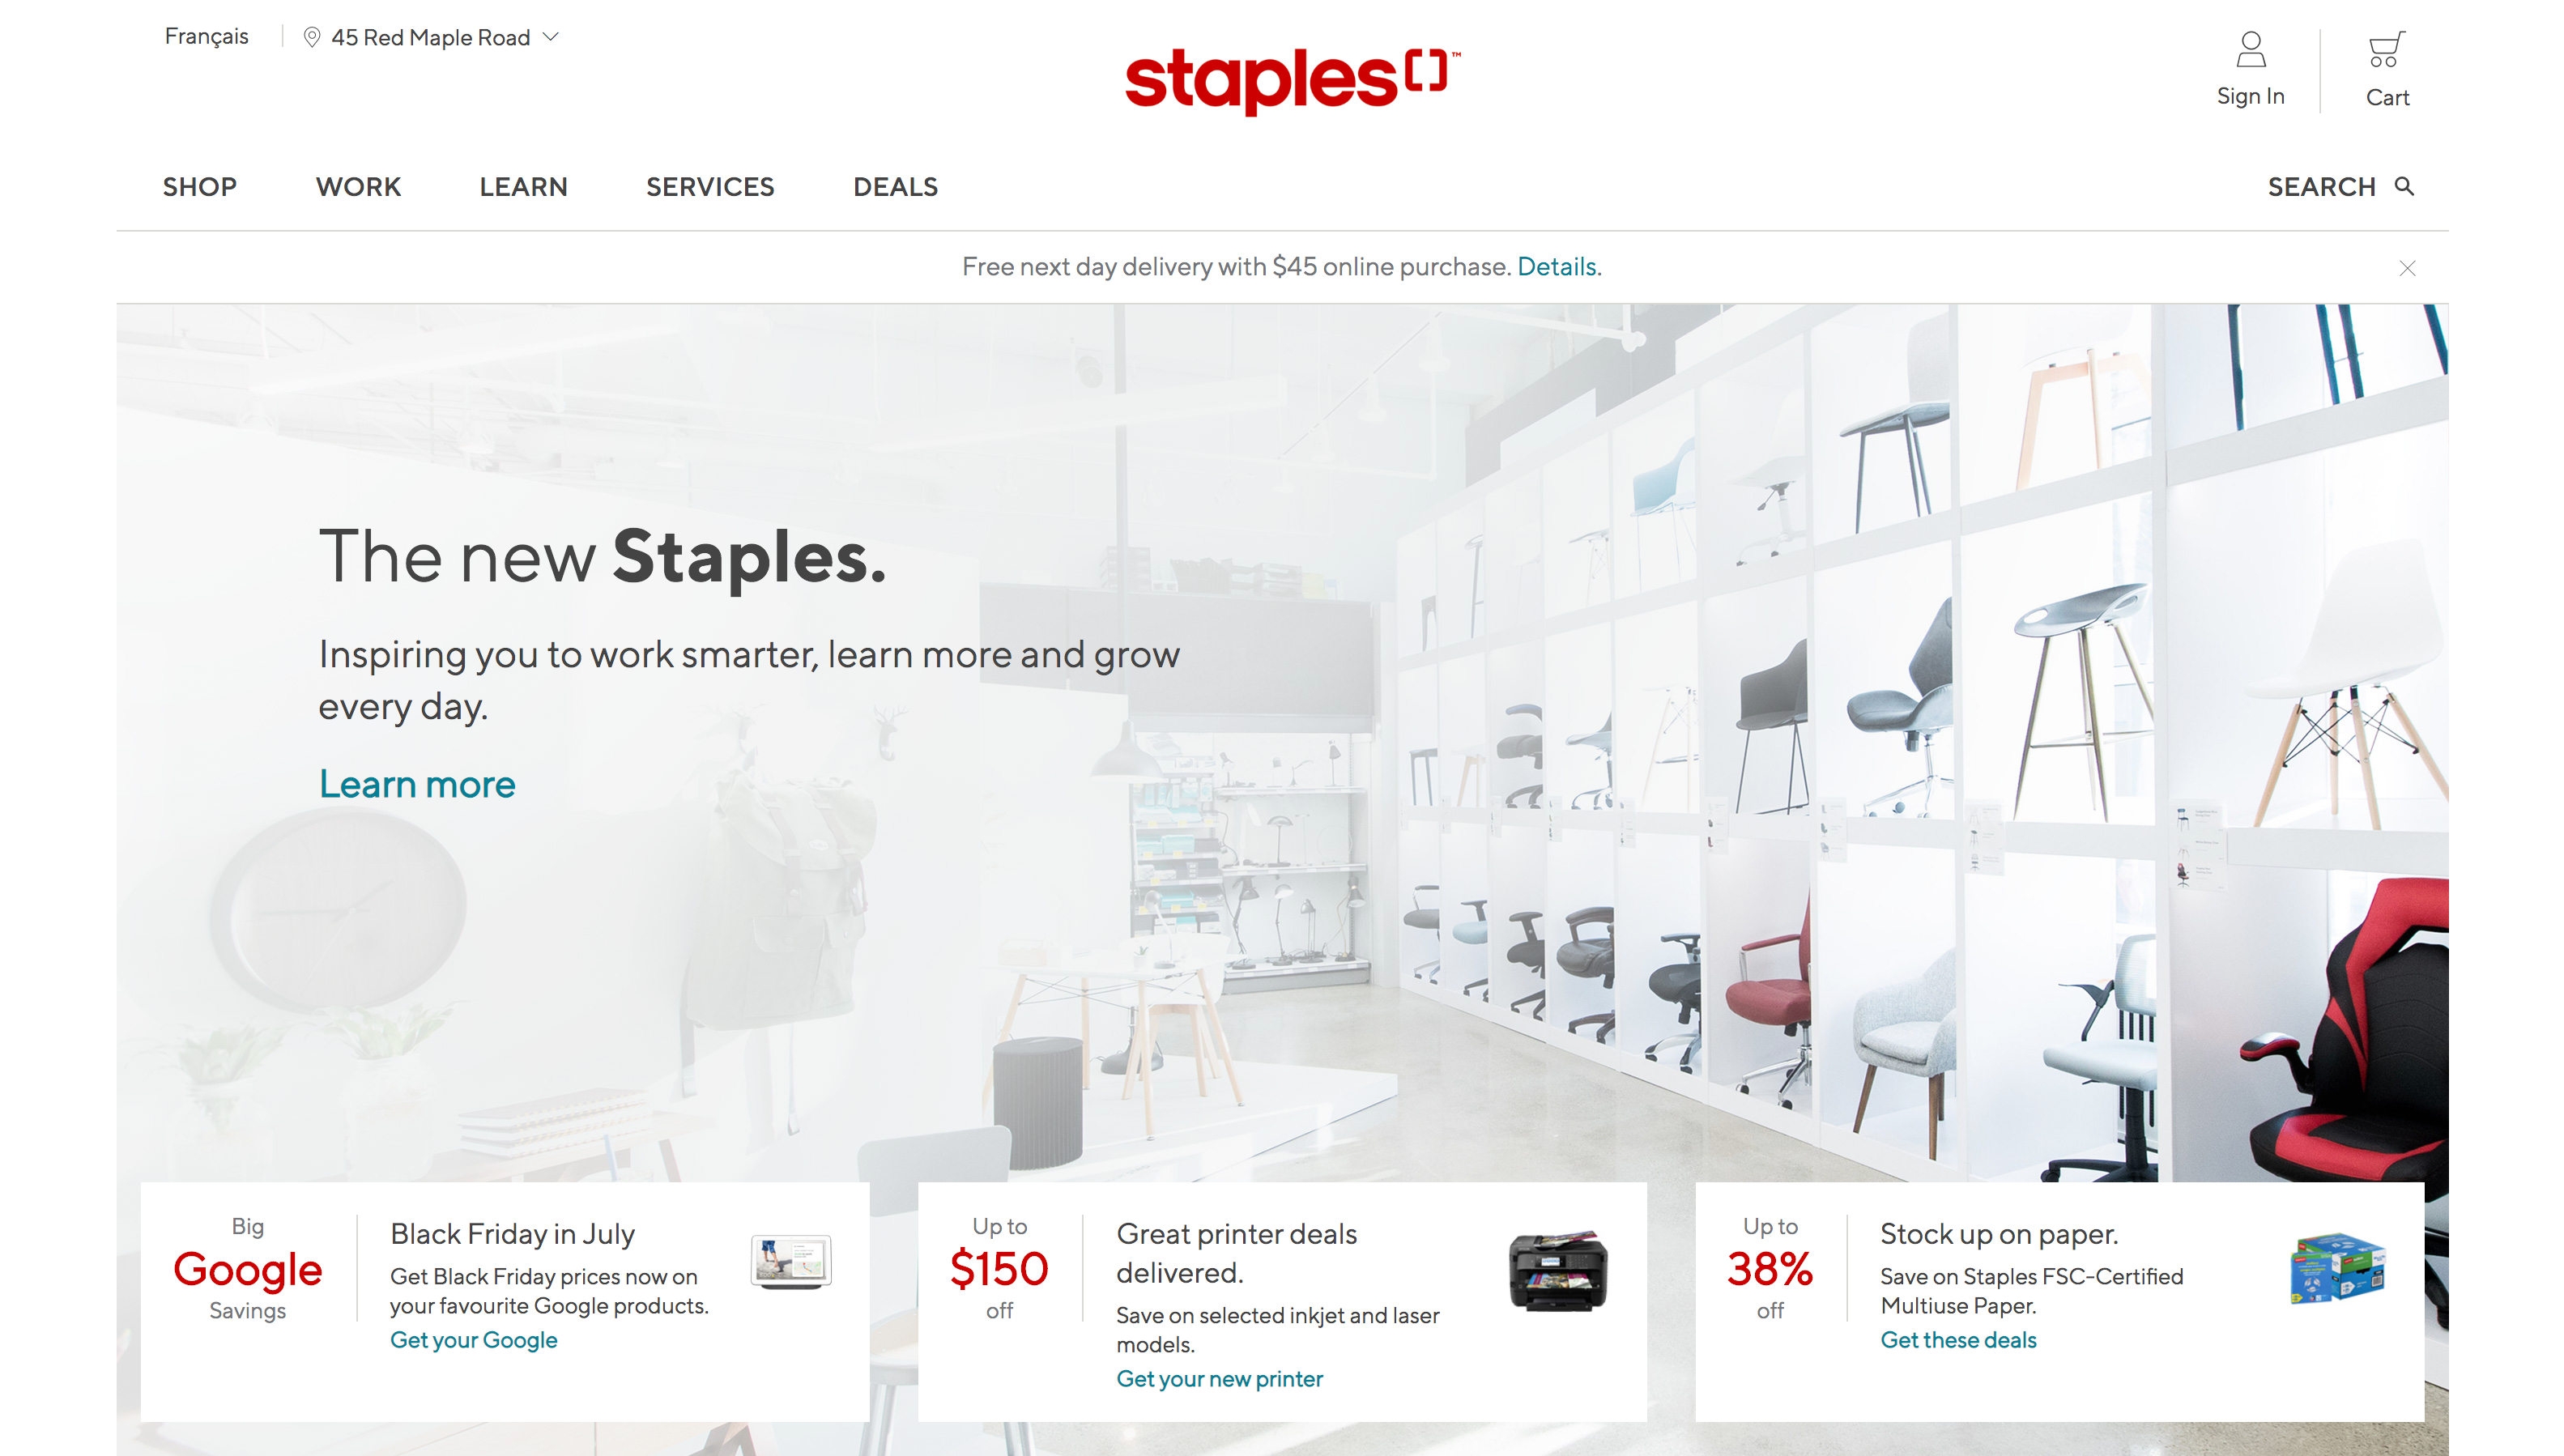 Staples Canada on LinkedIn: Introducing Staples Kids: Learn & Play